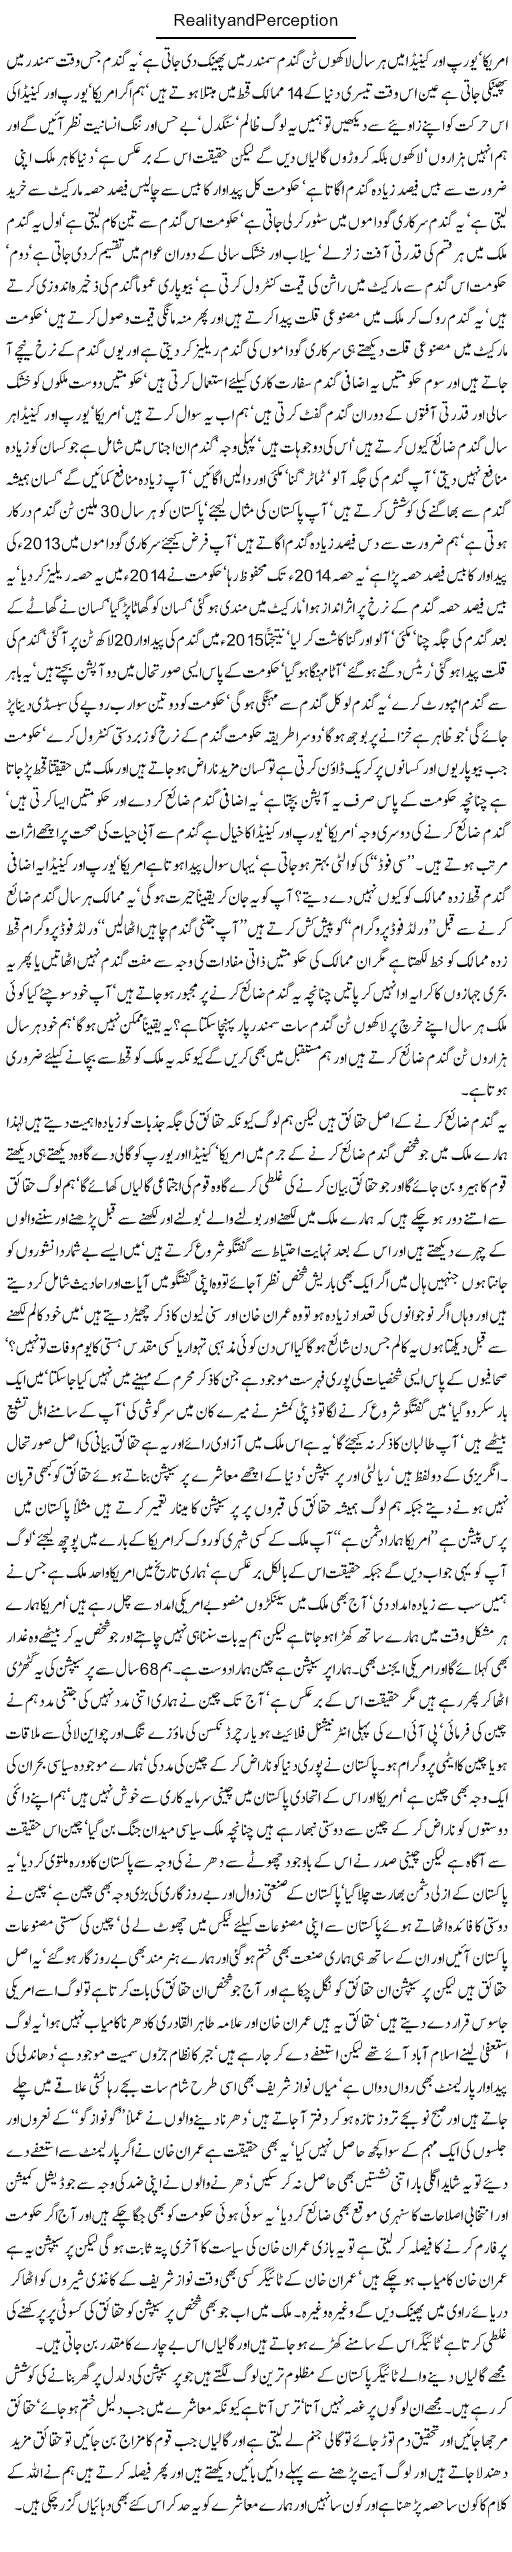 Reality and Perception by Javed Chaudhry